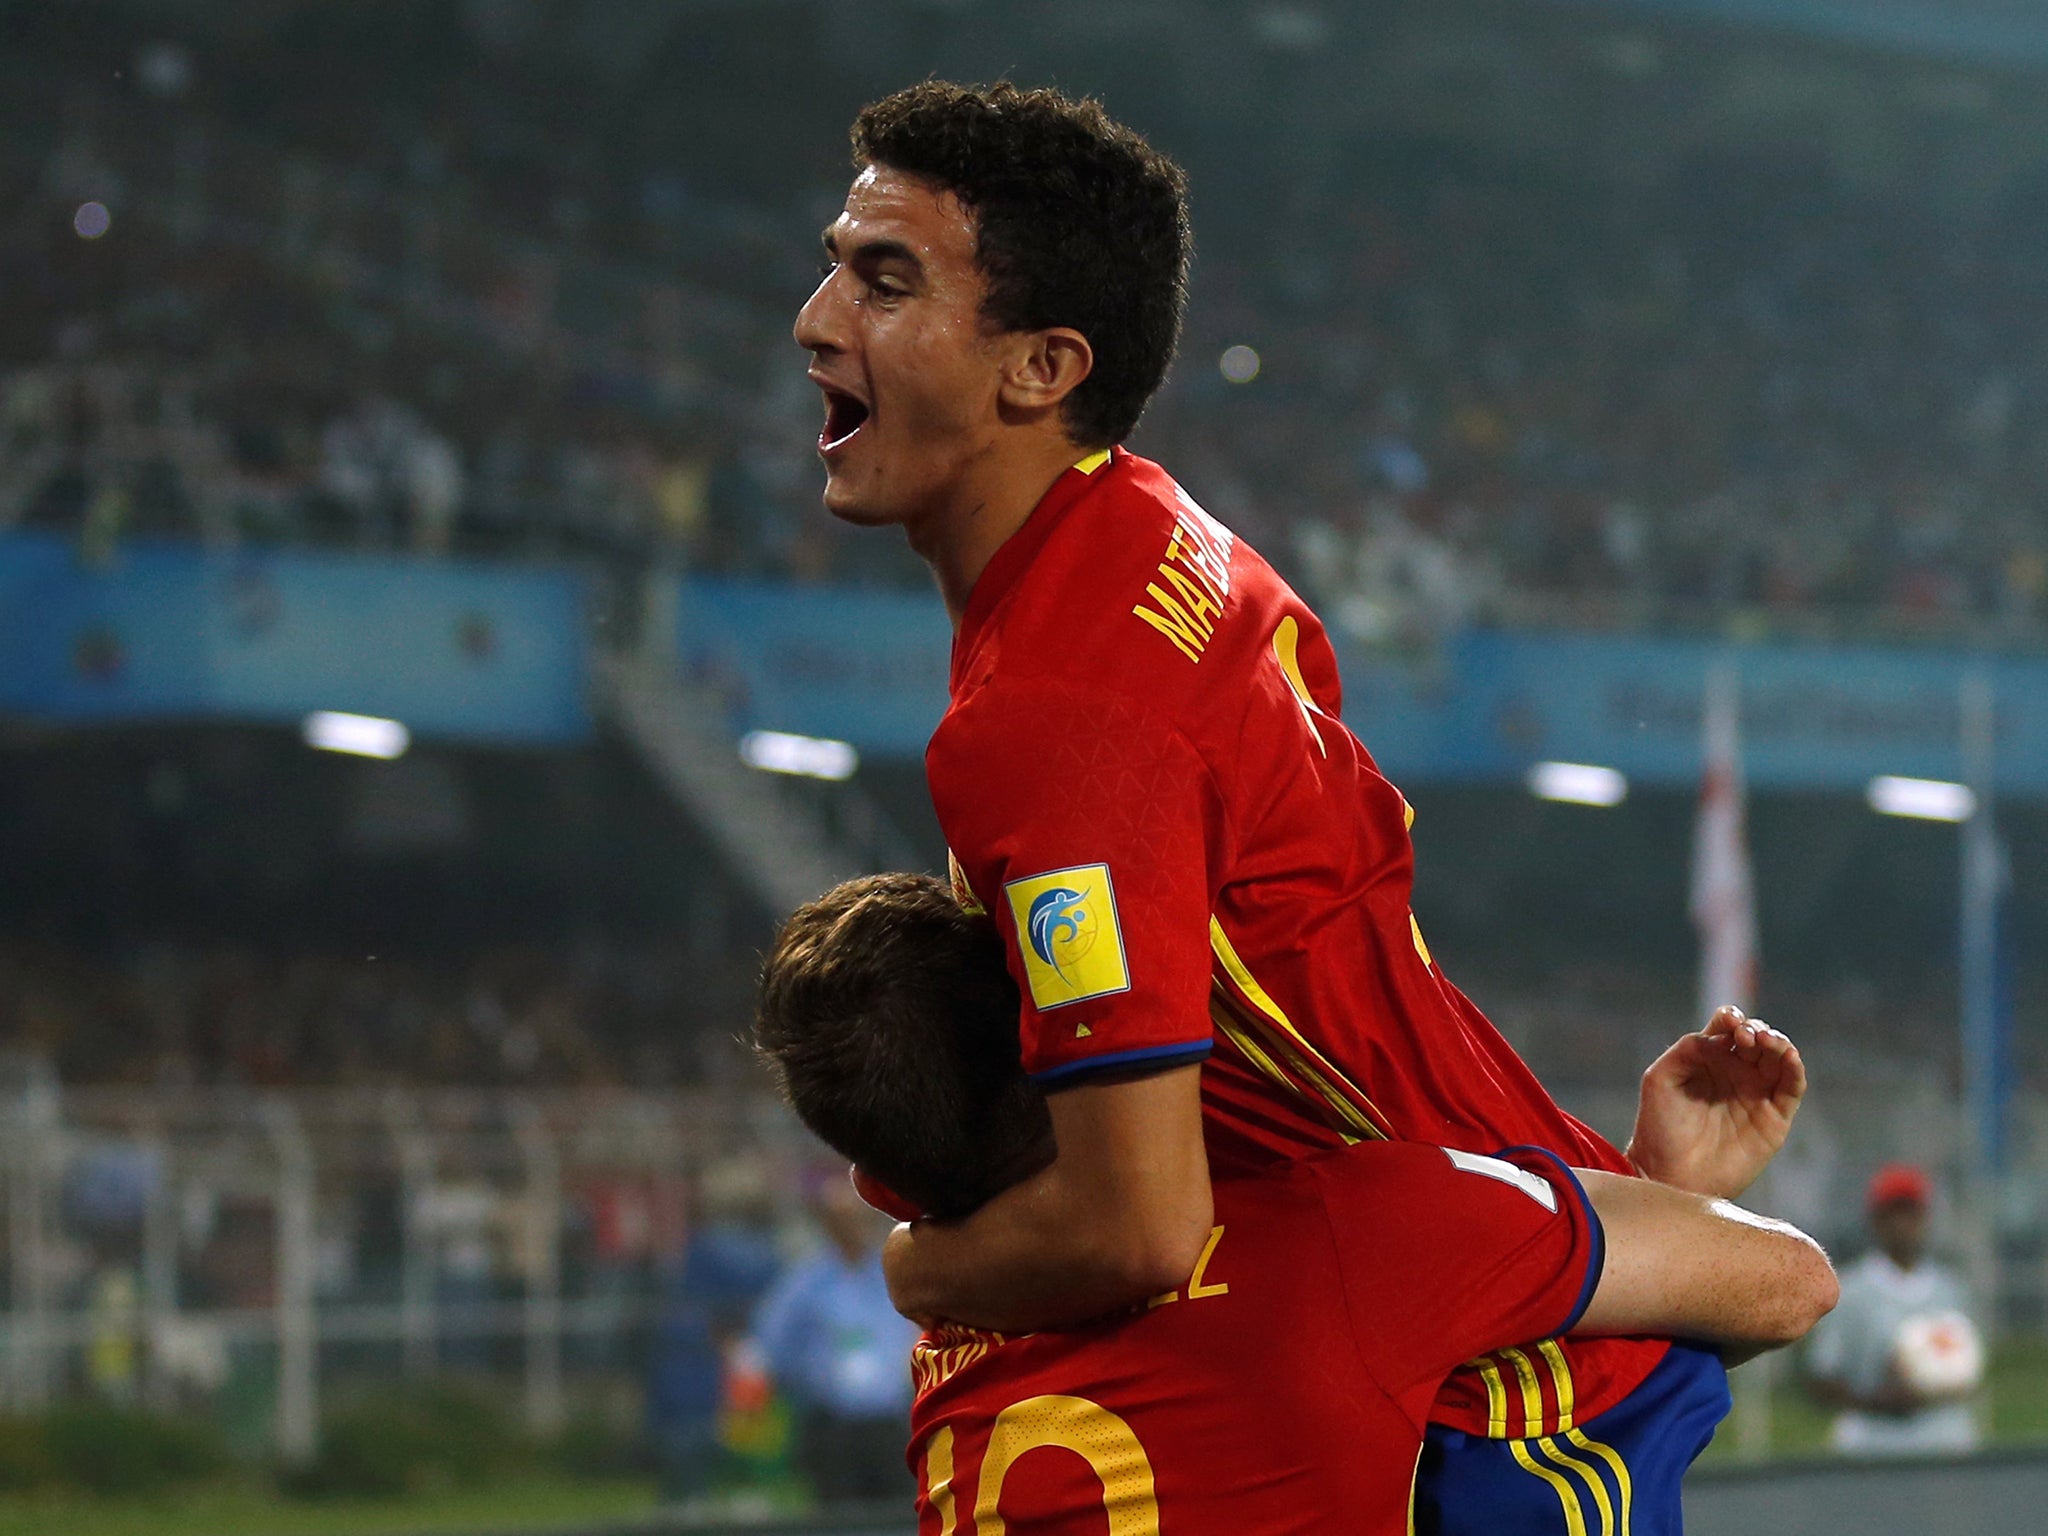 Sergio Gomez scored twice to give Spain a commanding lead